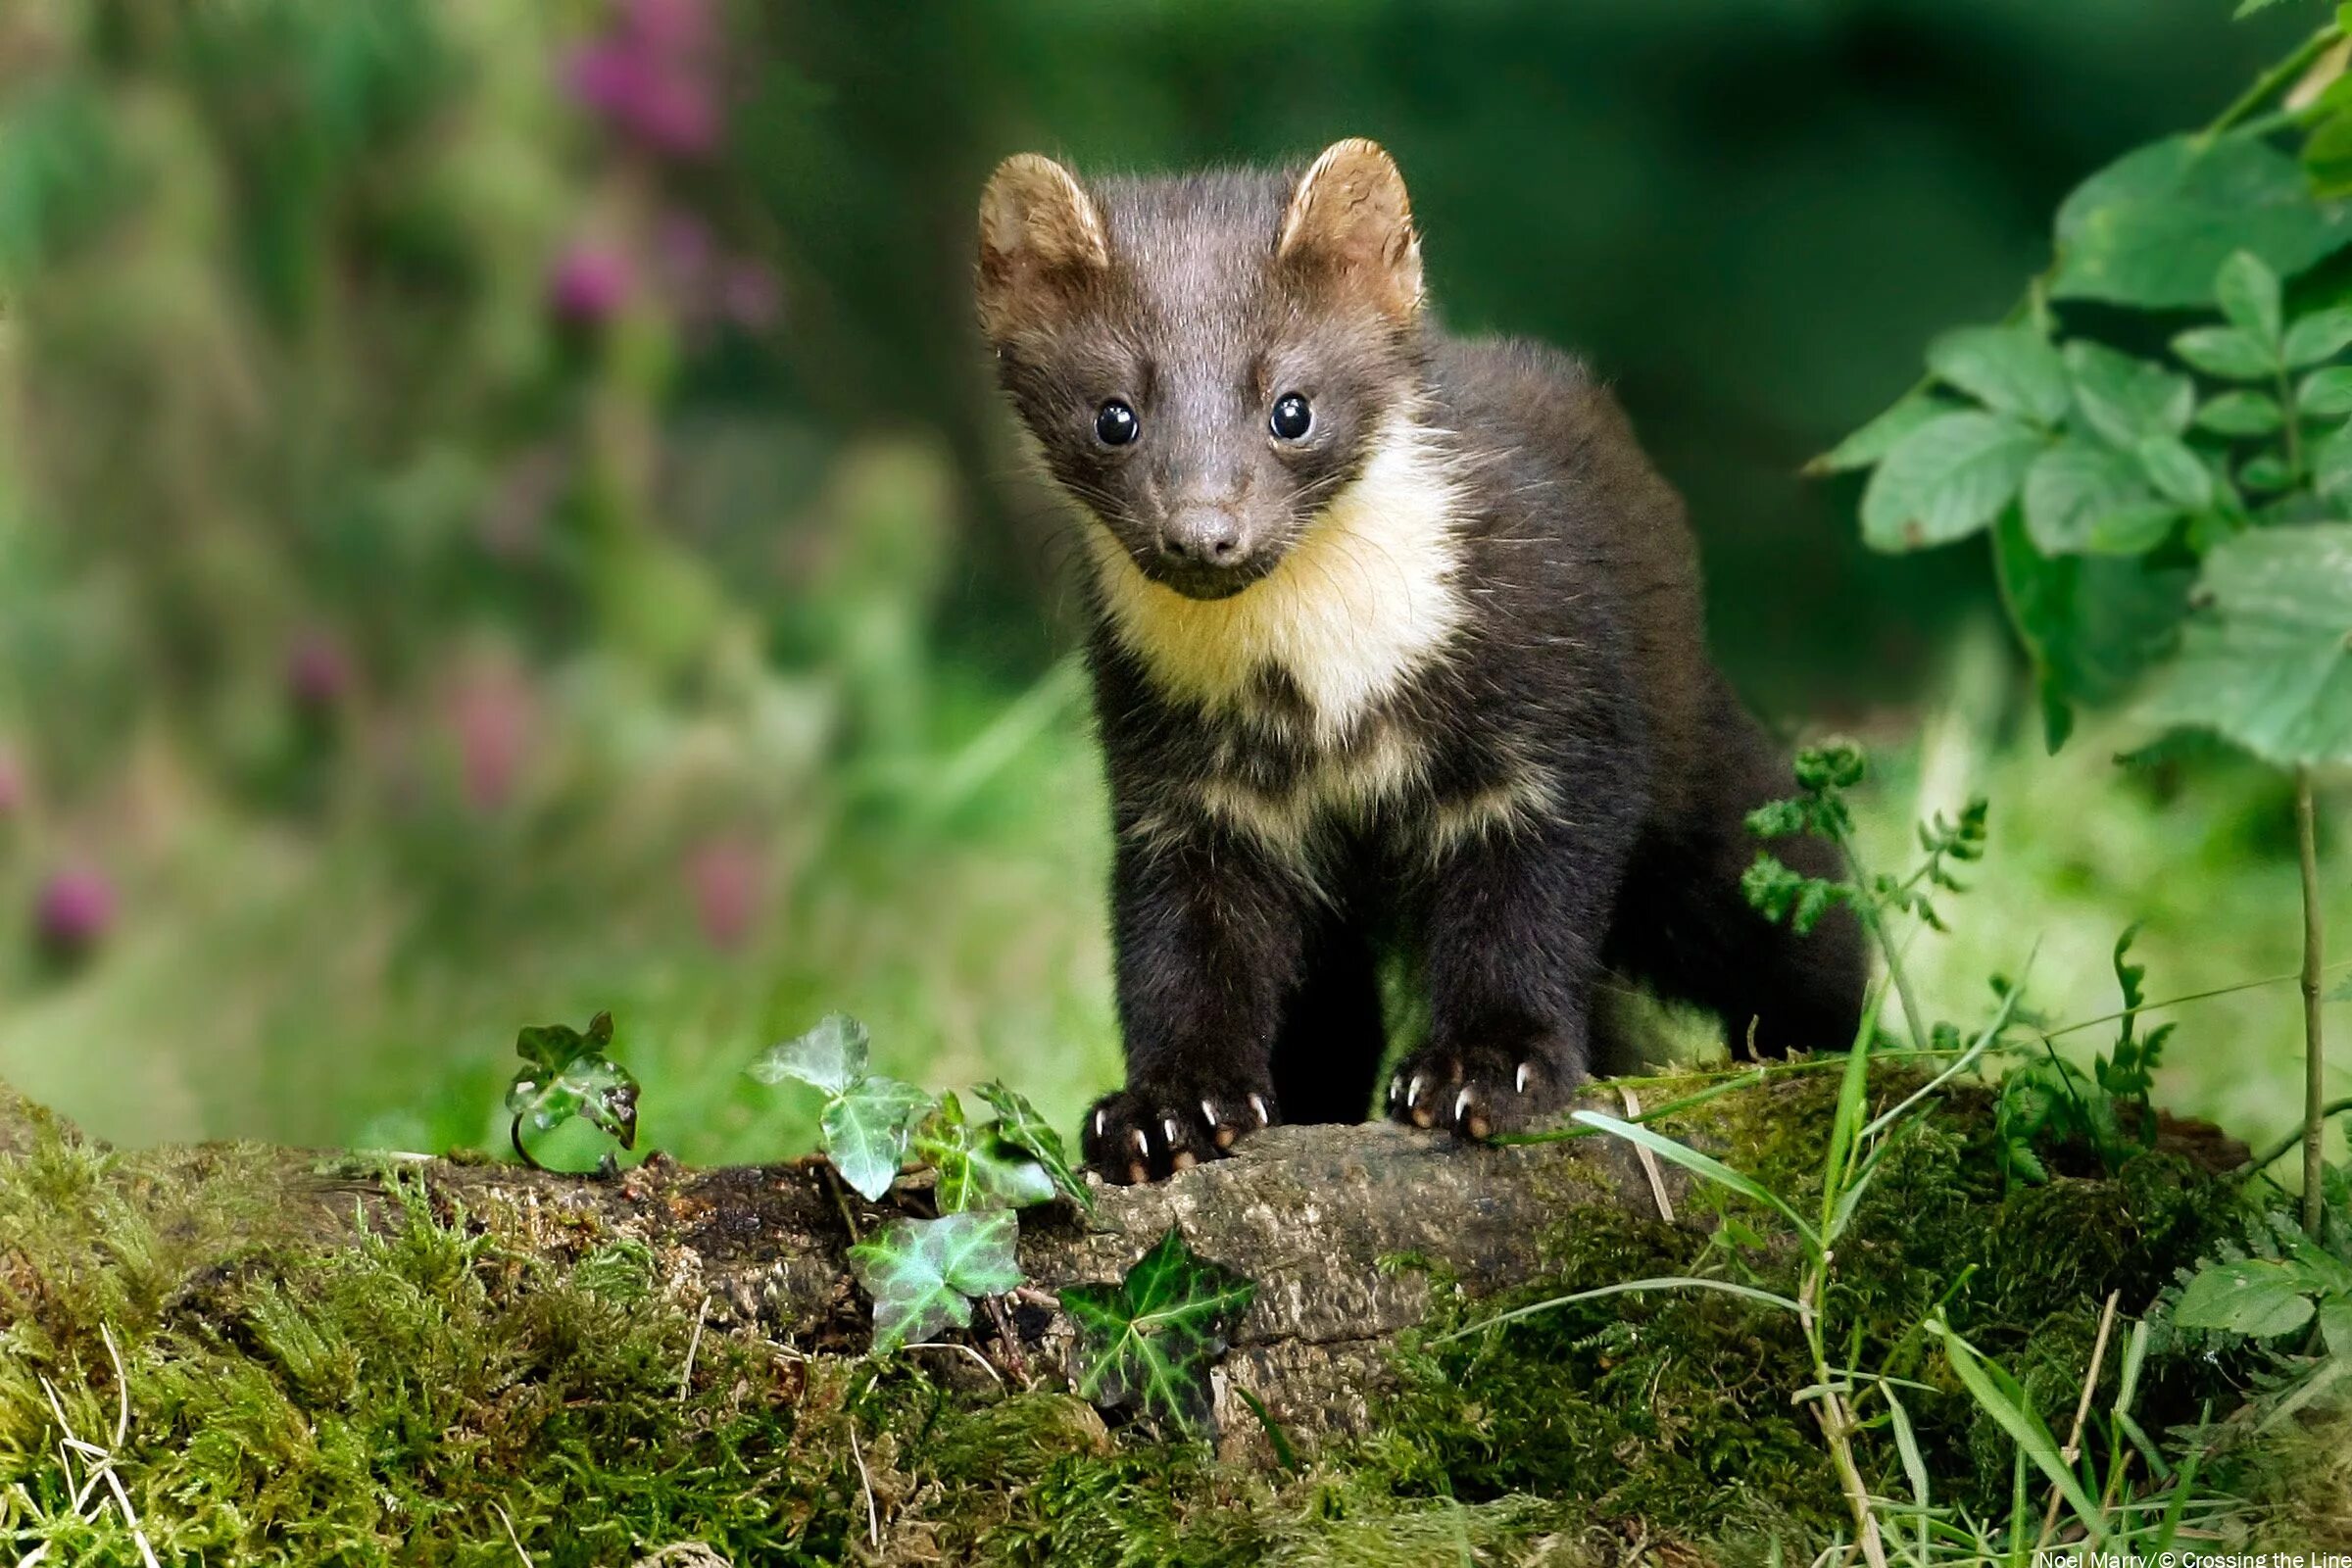 Out of the world marten